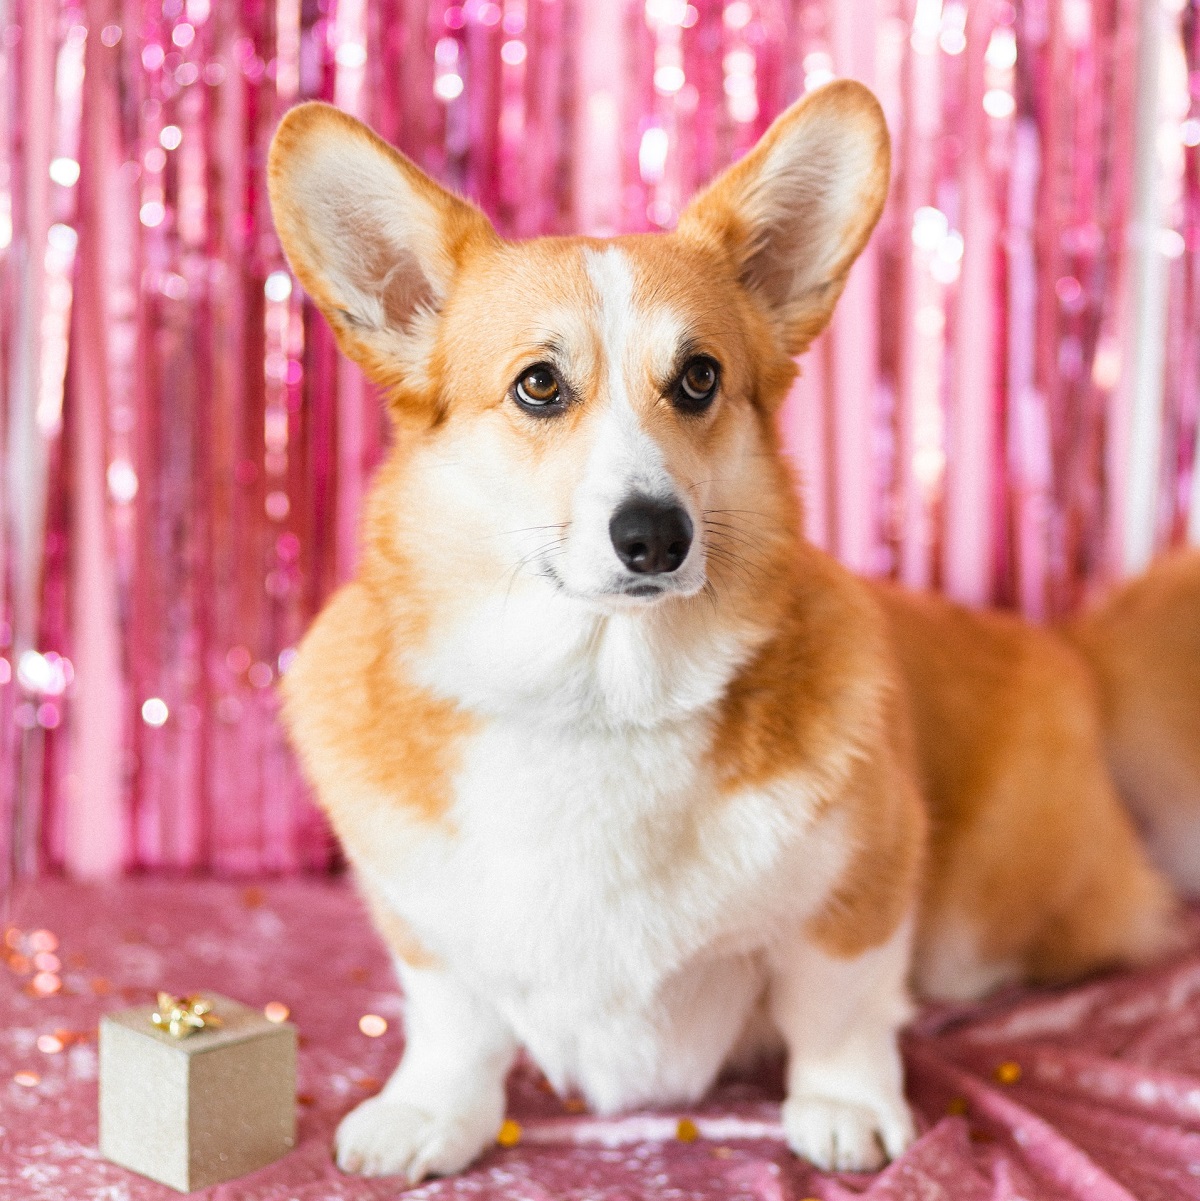 corgi-dog-standing-in-front-of-pink-party-streamers-and-next-to-a-small-gift